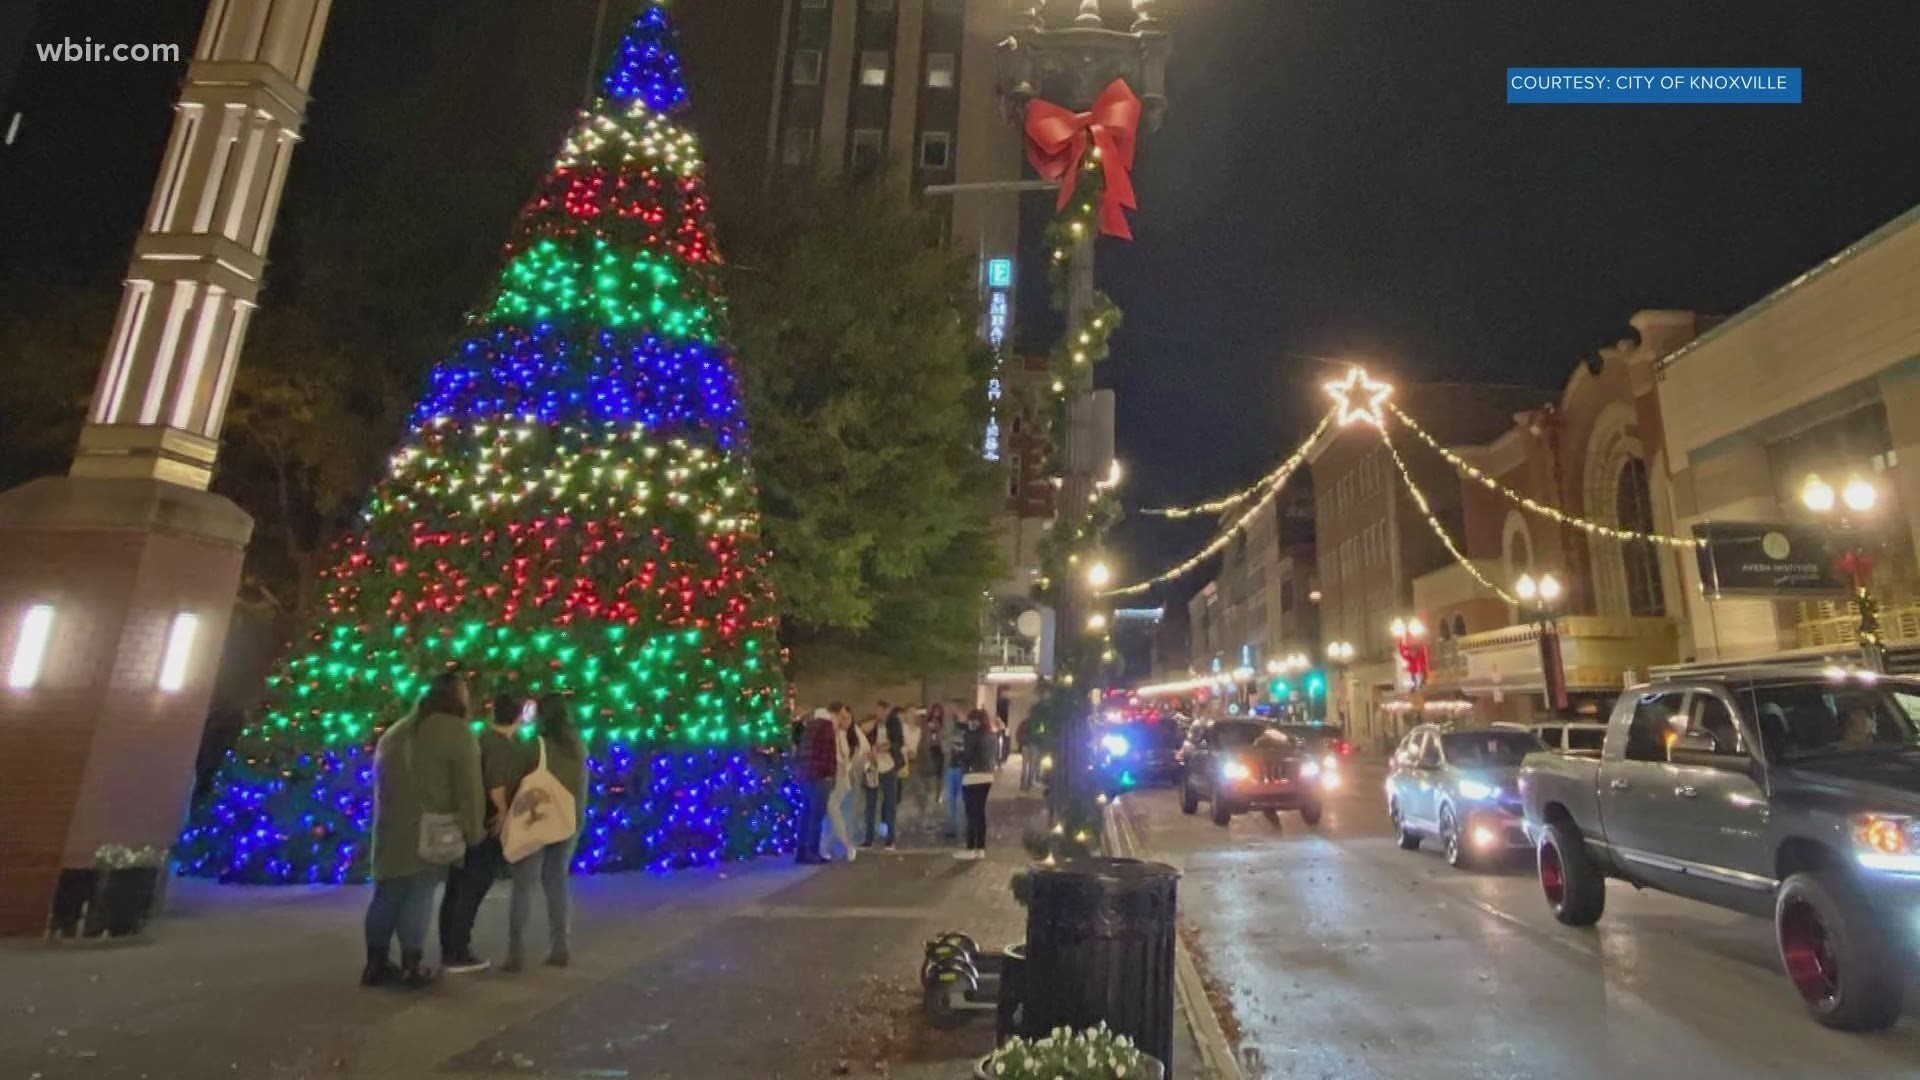 The Christmas sprit is turning brighter by the day across East Tennessee.